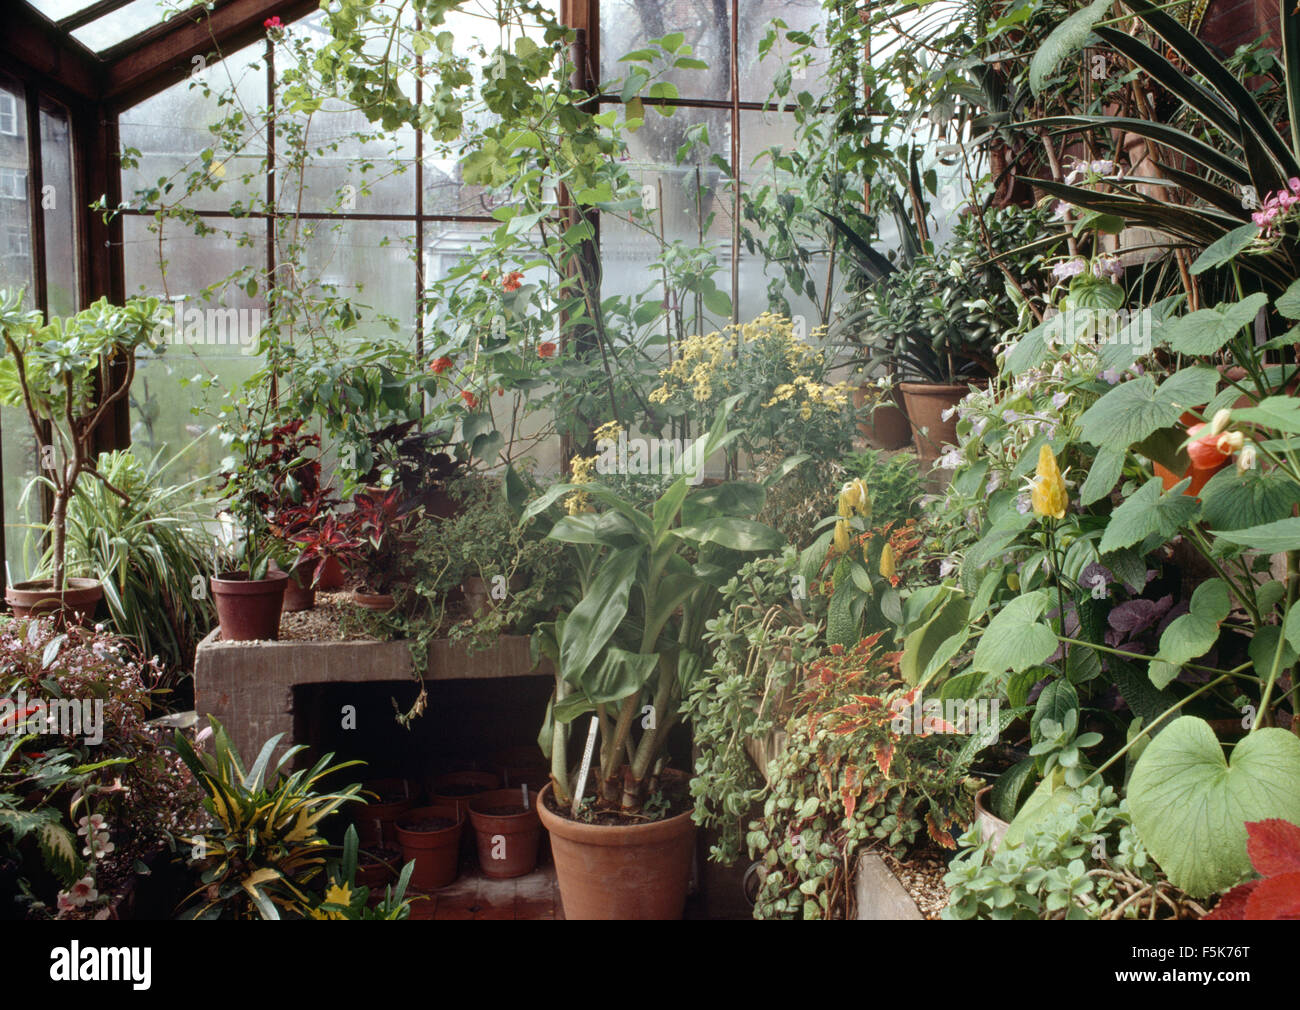 Plants in pots inside a greenhouse Stock Photo